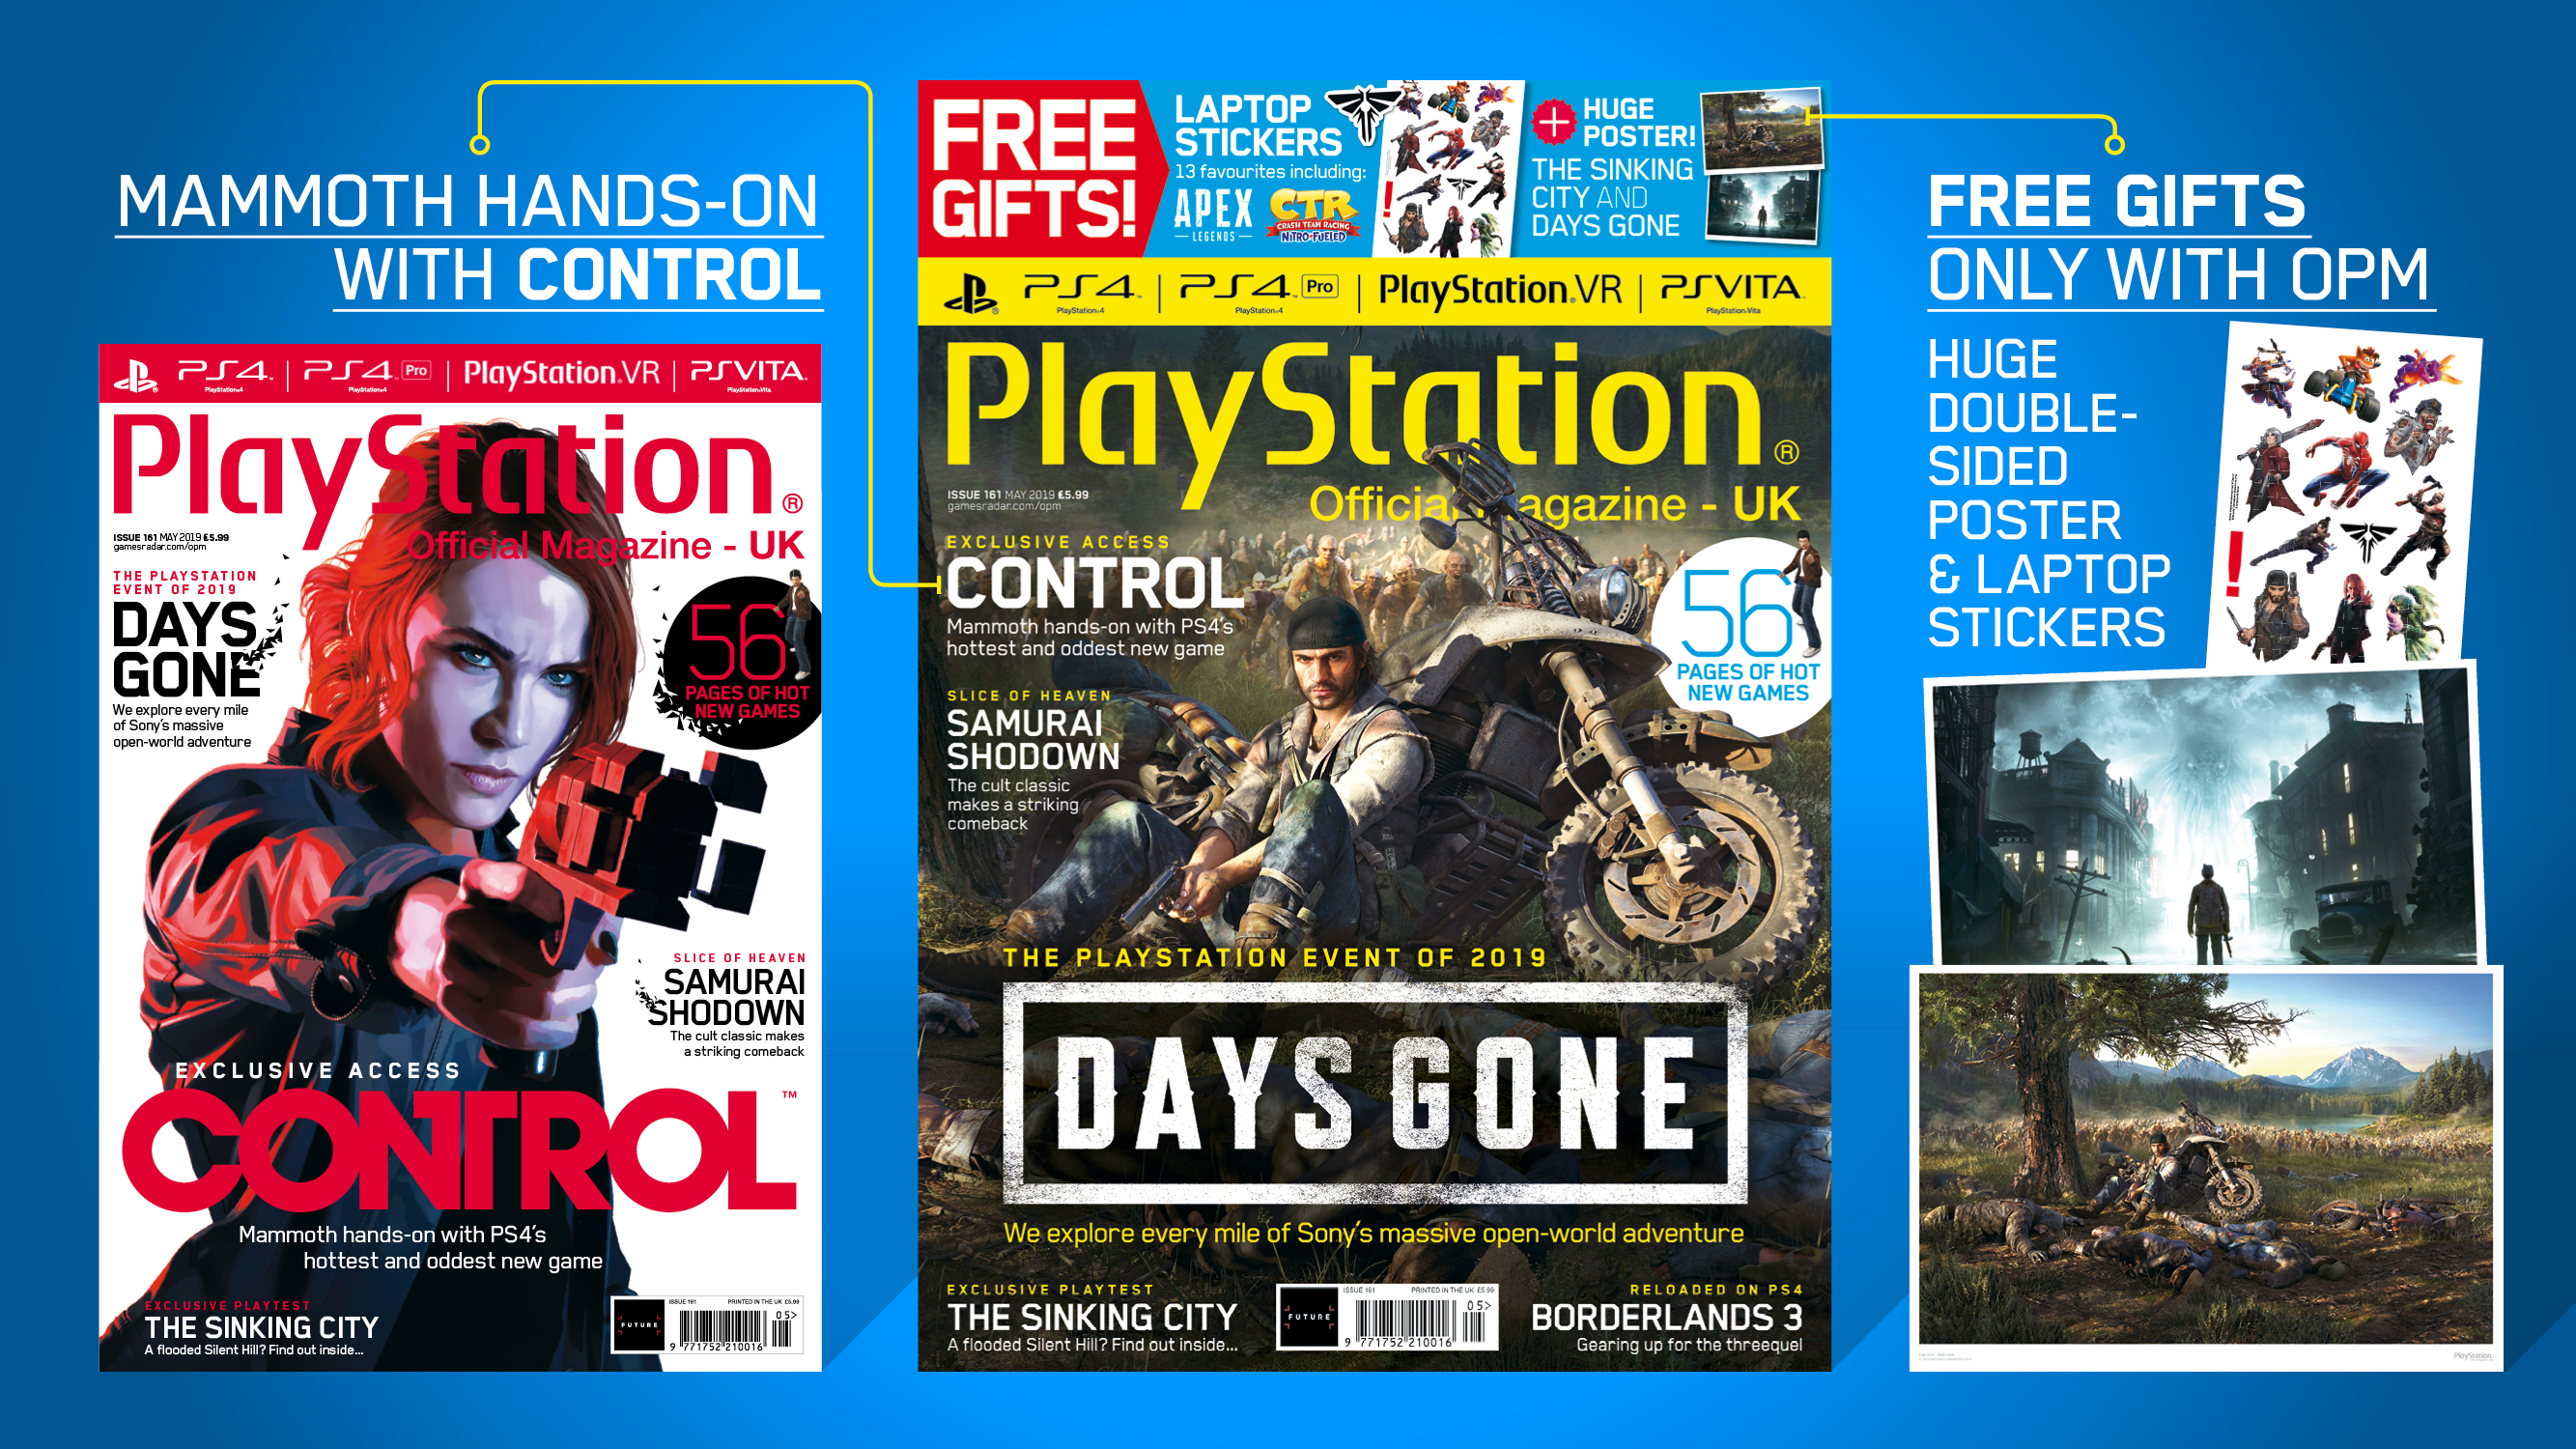 Days Gone, Control, and The Sinking City: Official PlayStation Magazine #161 takes a deep dive into PS4’s hottest new games